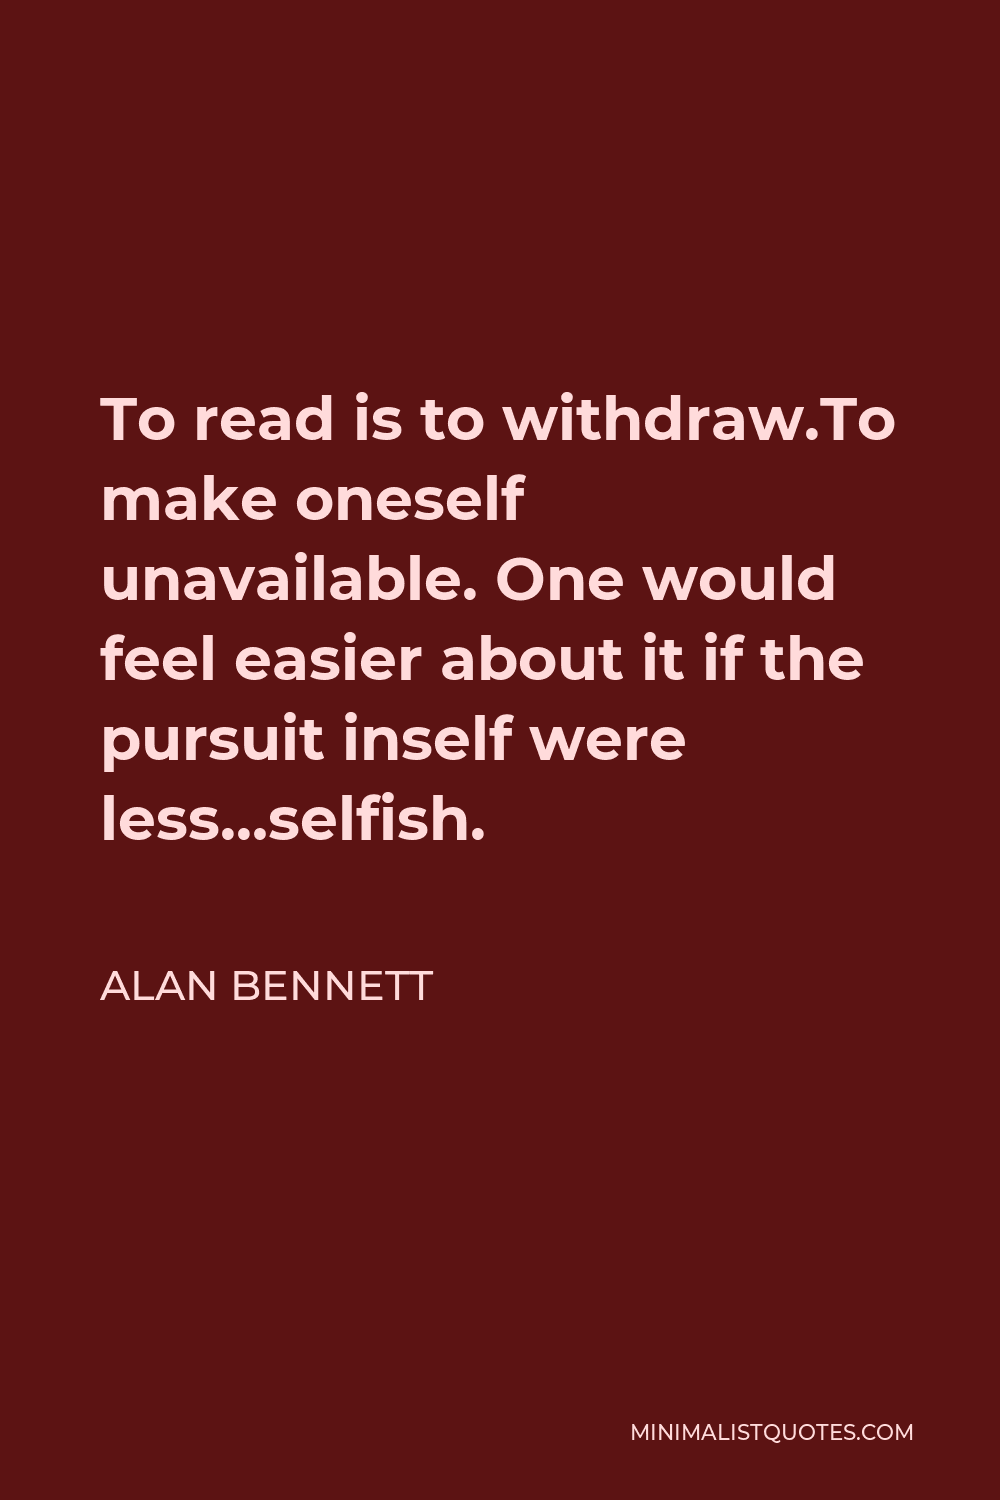 Alan Bennett Quote - To read is to withdraw.To make oneself unavailable. One would feel easier about it if the pursuit inself were less…selfish.